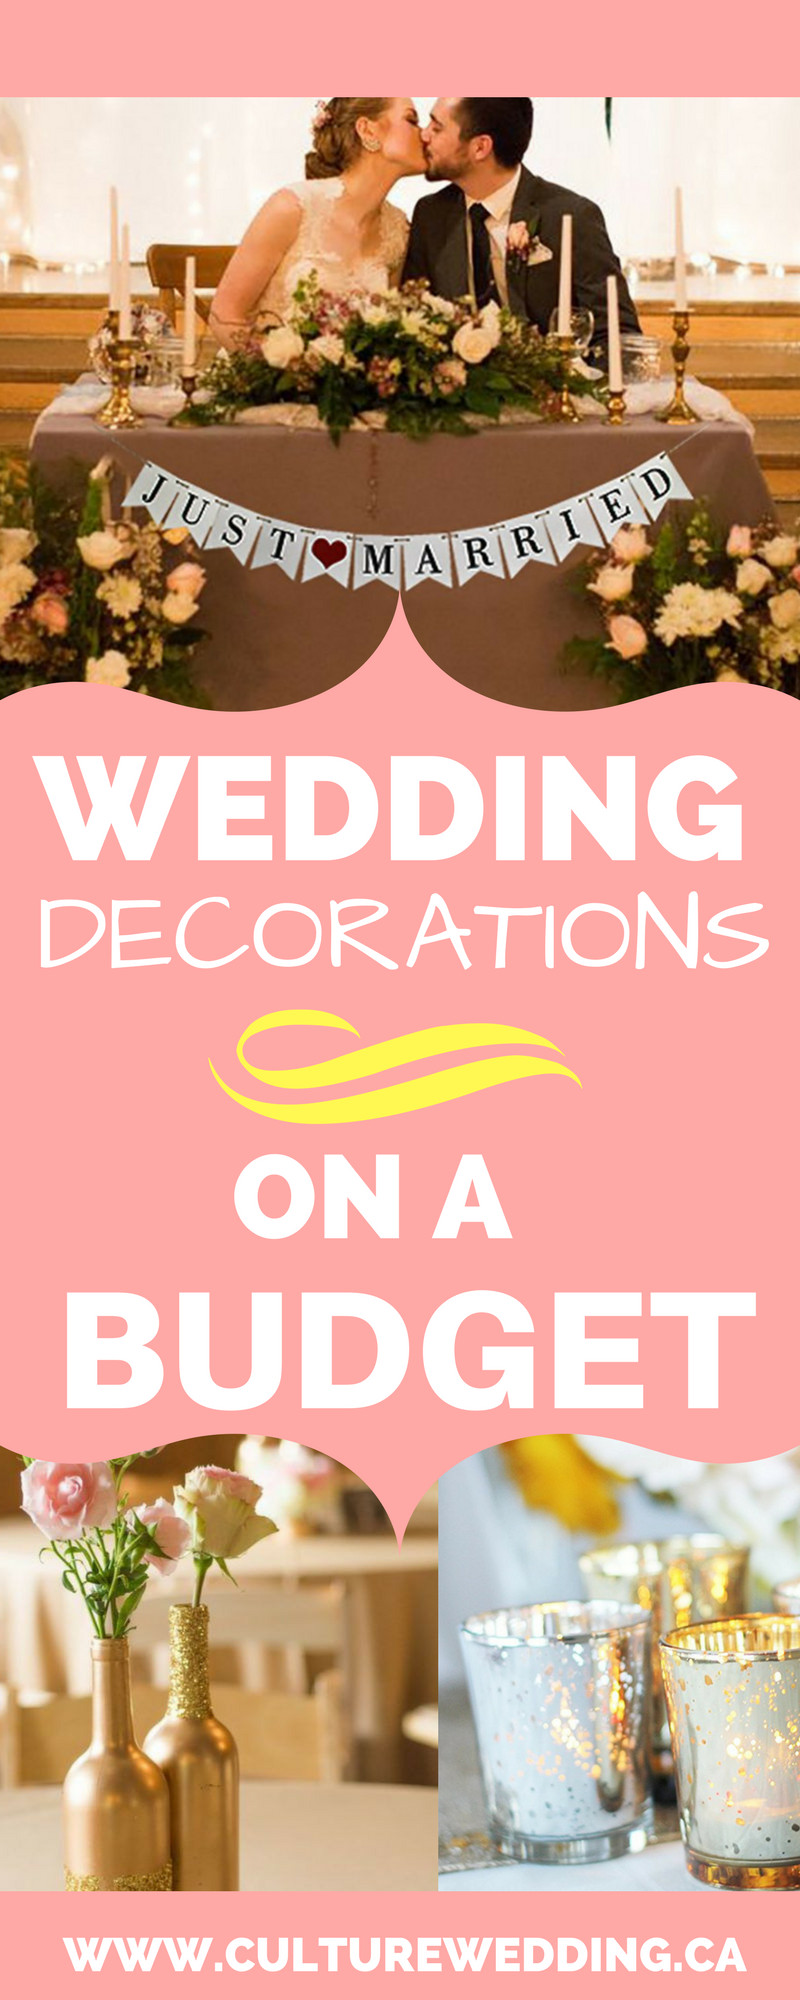 Engagement Party Decorating Ideas On A Budget
 How to Wedding Decorations on a Bud Get them now